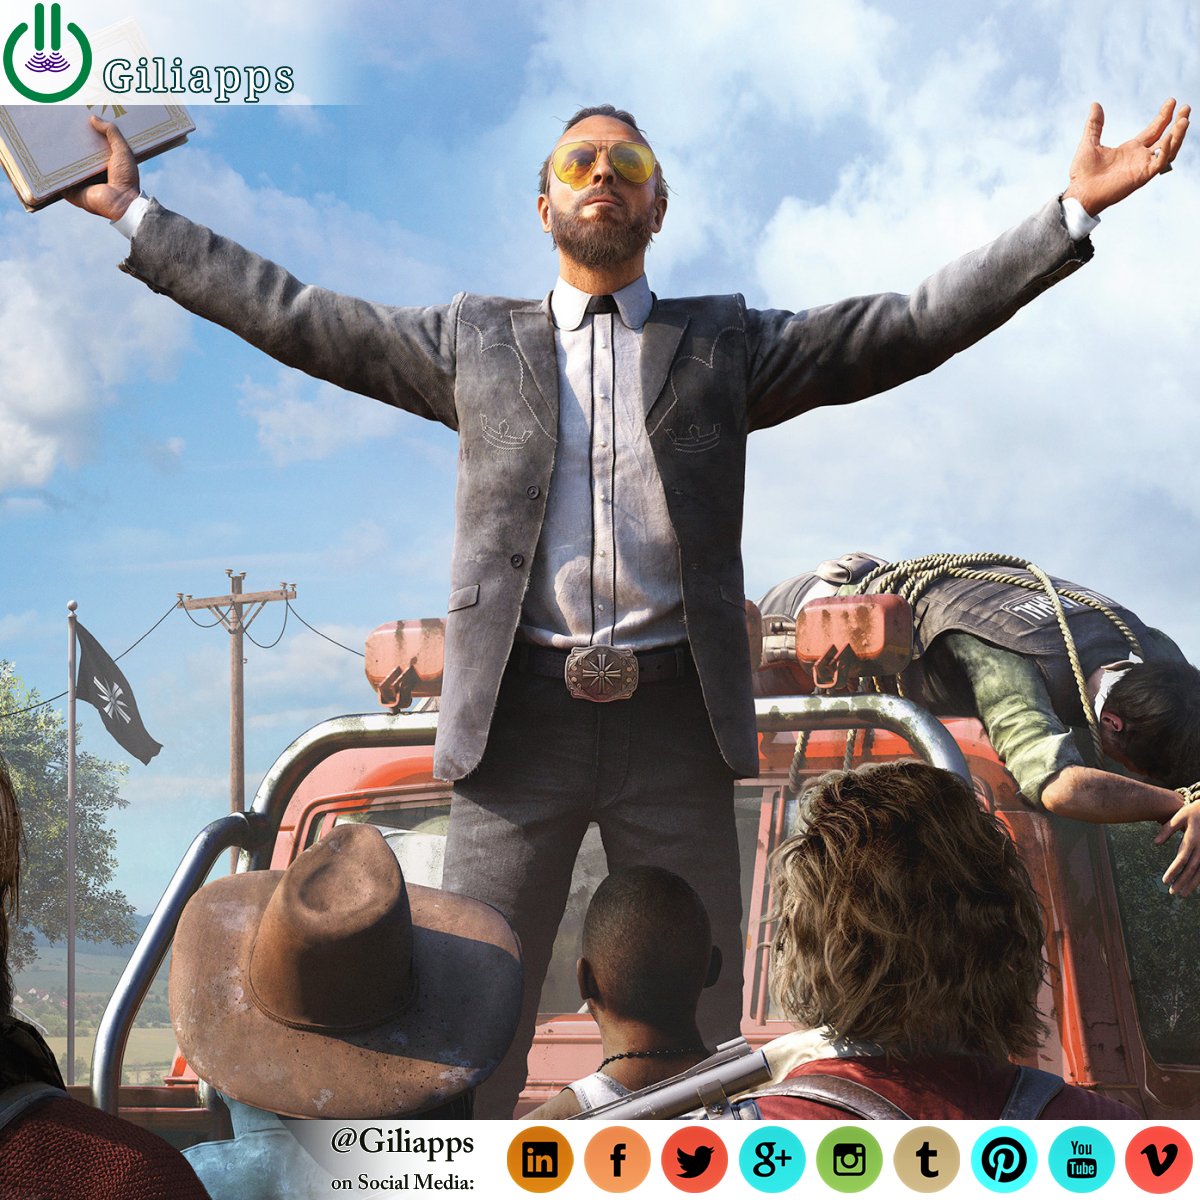 Far Cry 5 will release on 27 Mar 2018